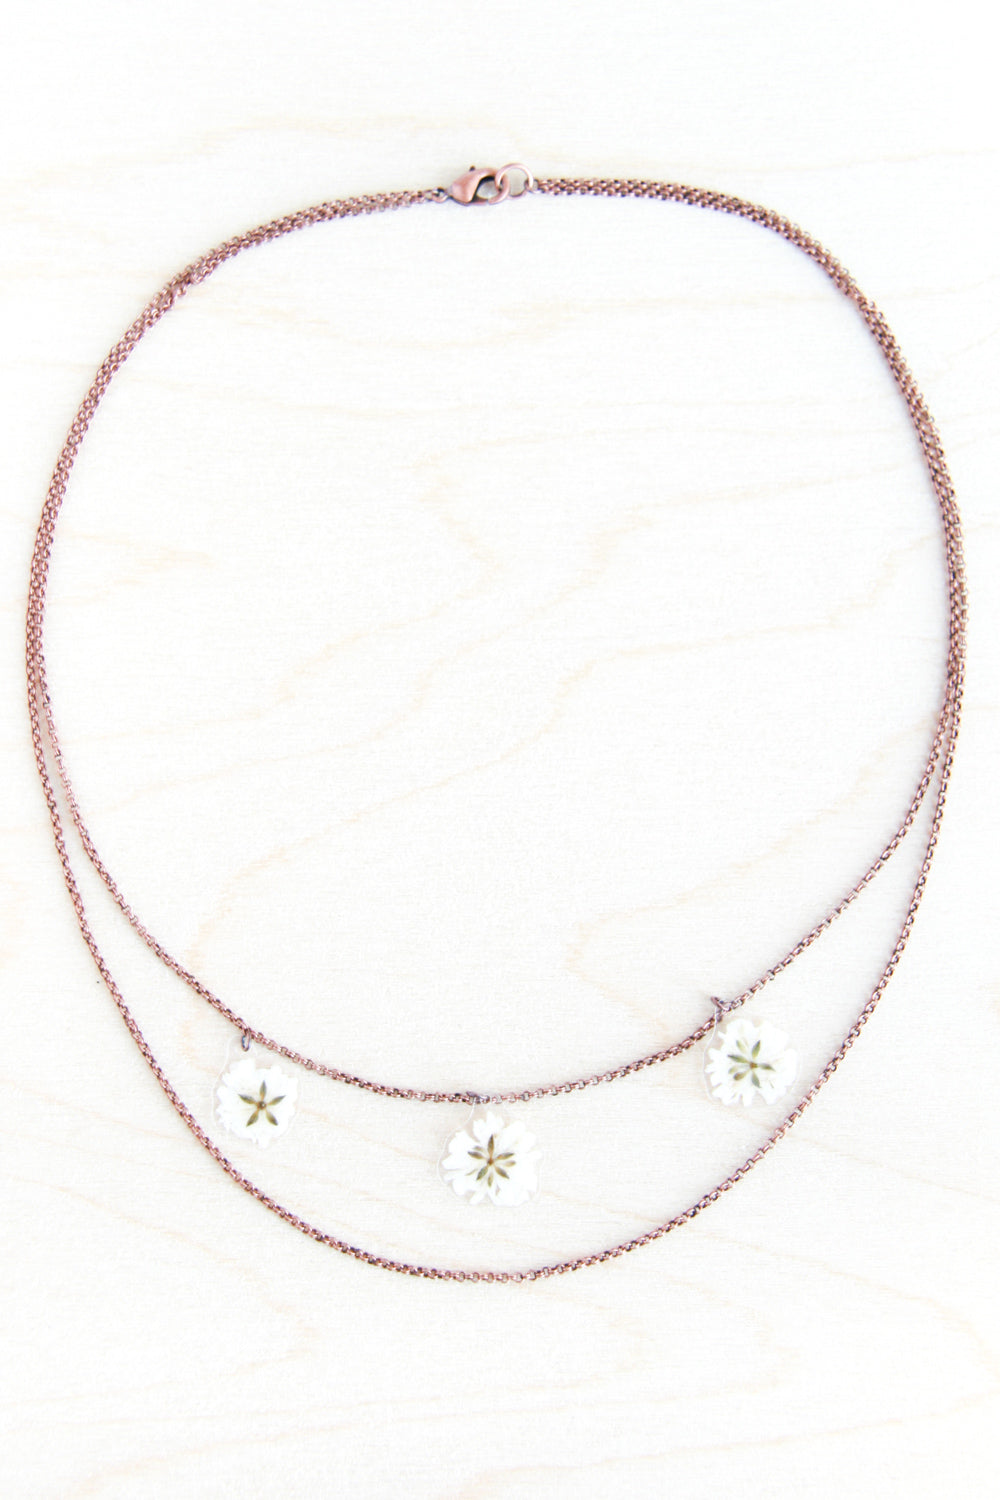 Baby's Breath Pressed Flower Necklace